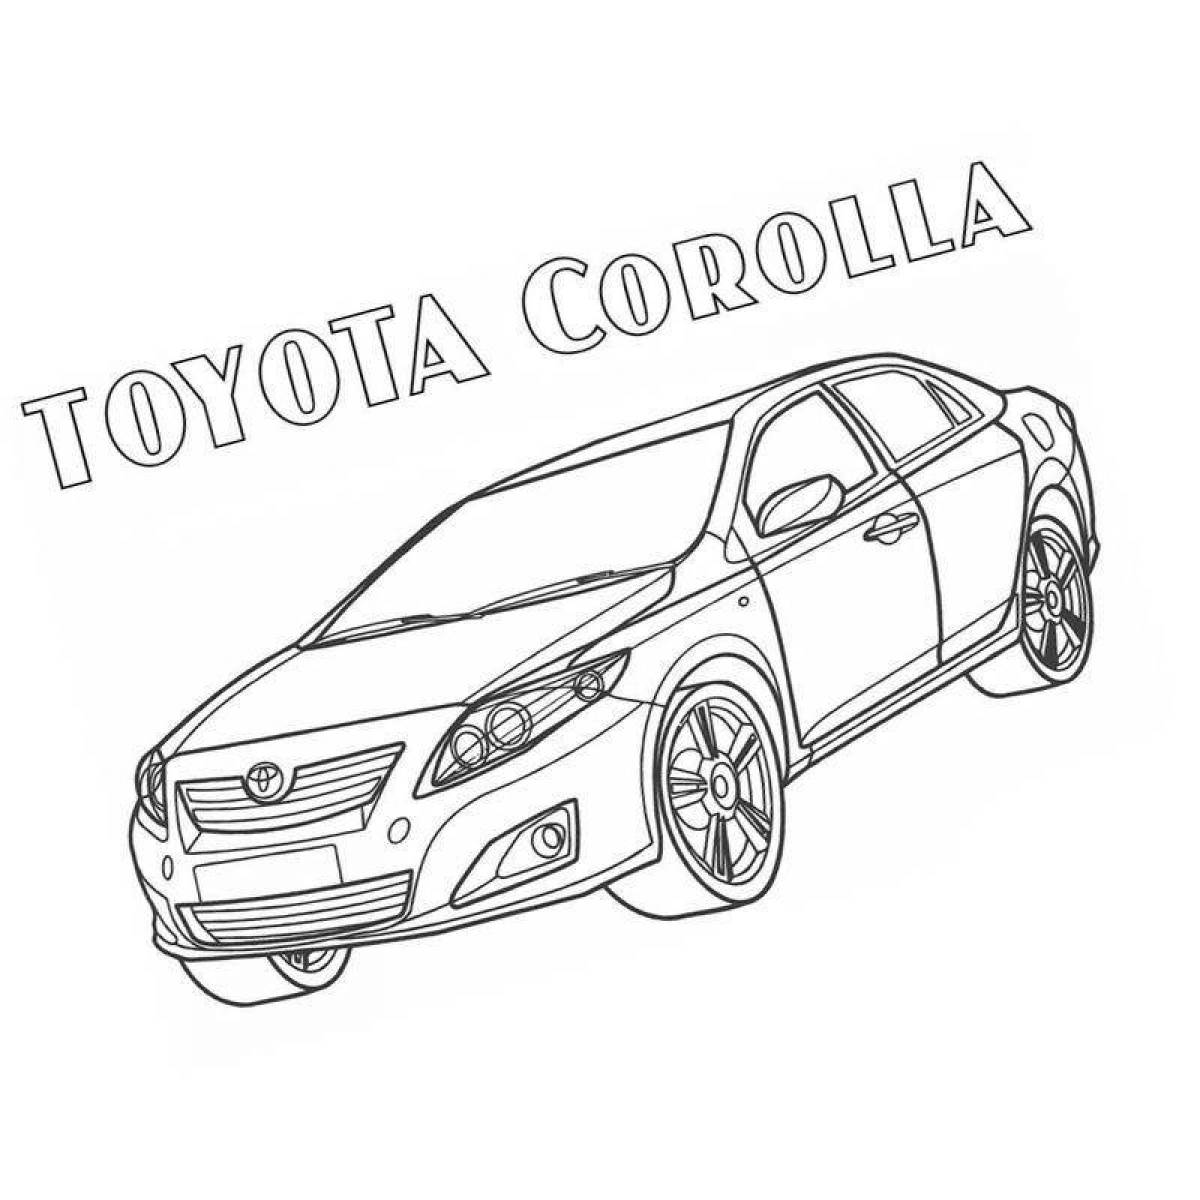 Great coloring camry